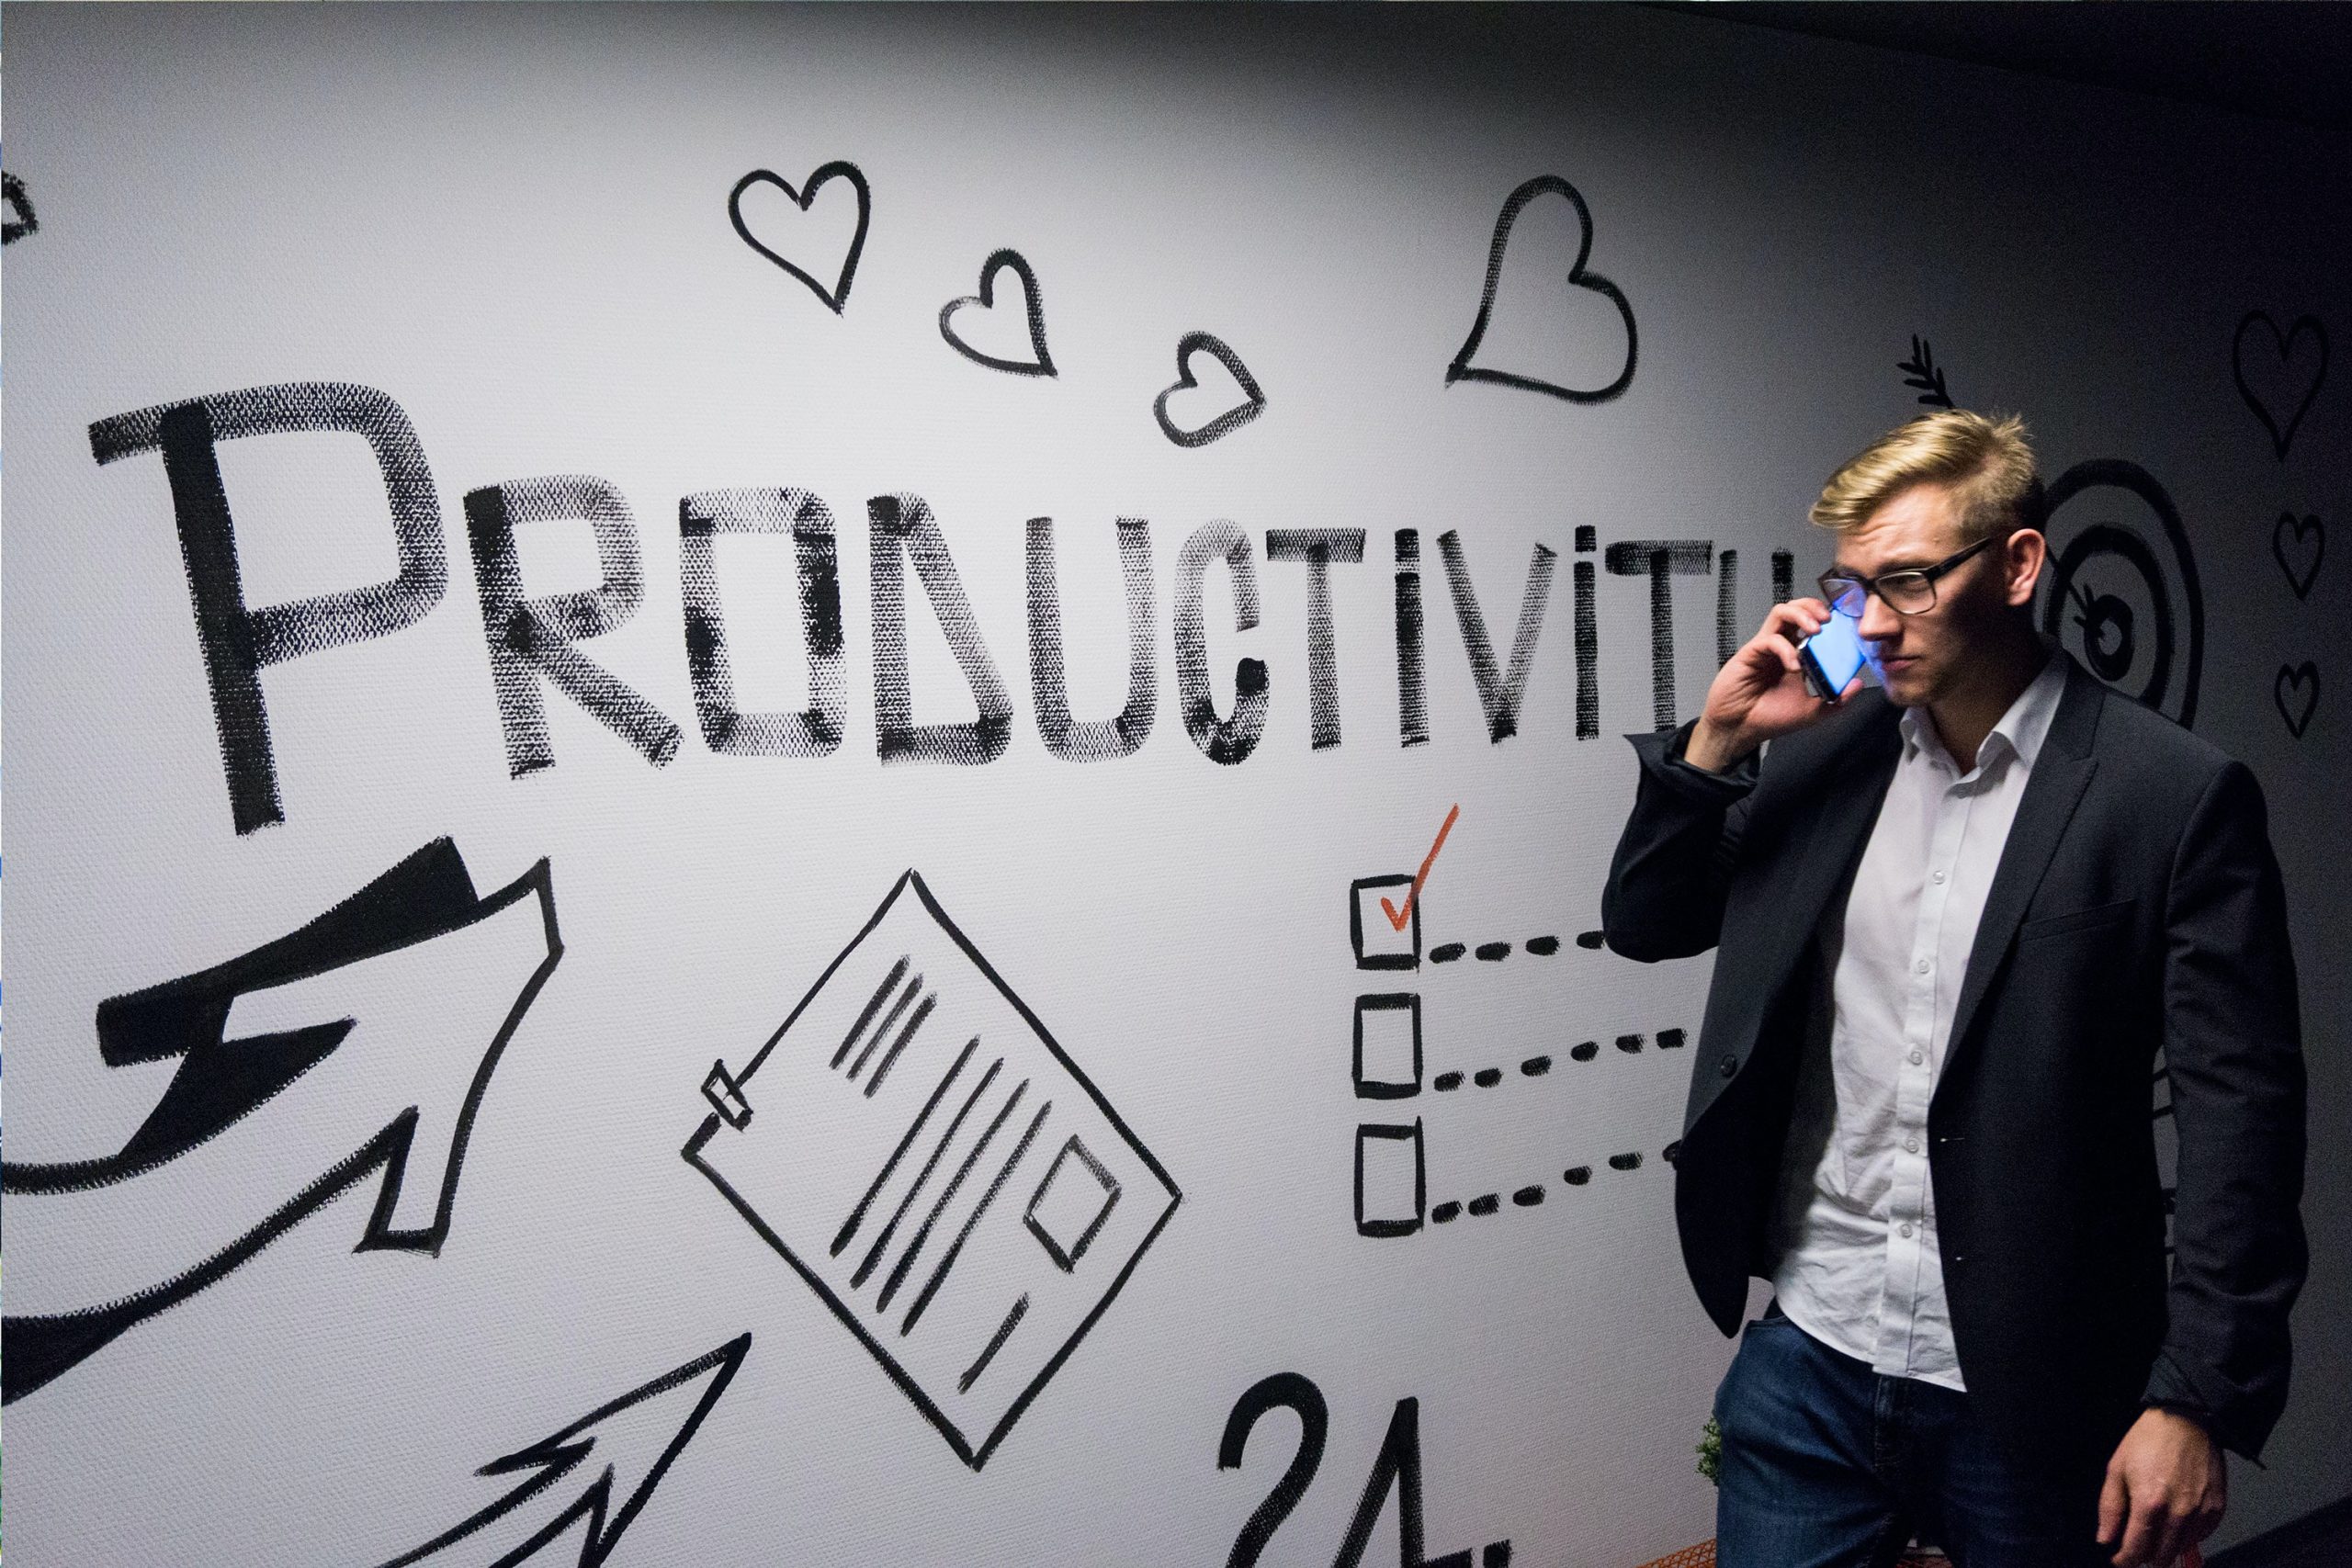 CHECKLIST OF THE DAY: 10 WAYS TO BOOST YOUR PRODUCTIVITY